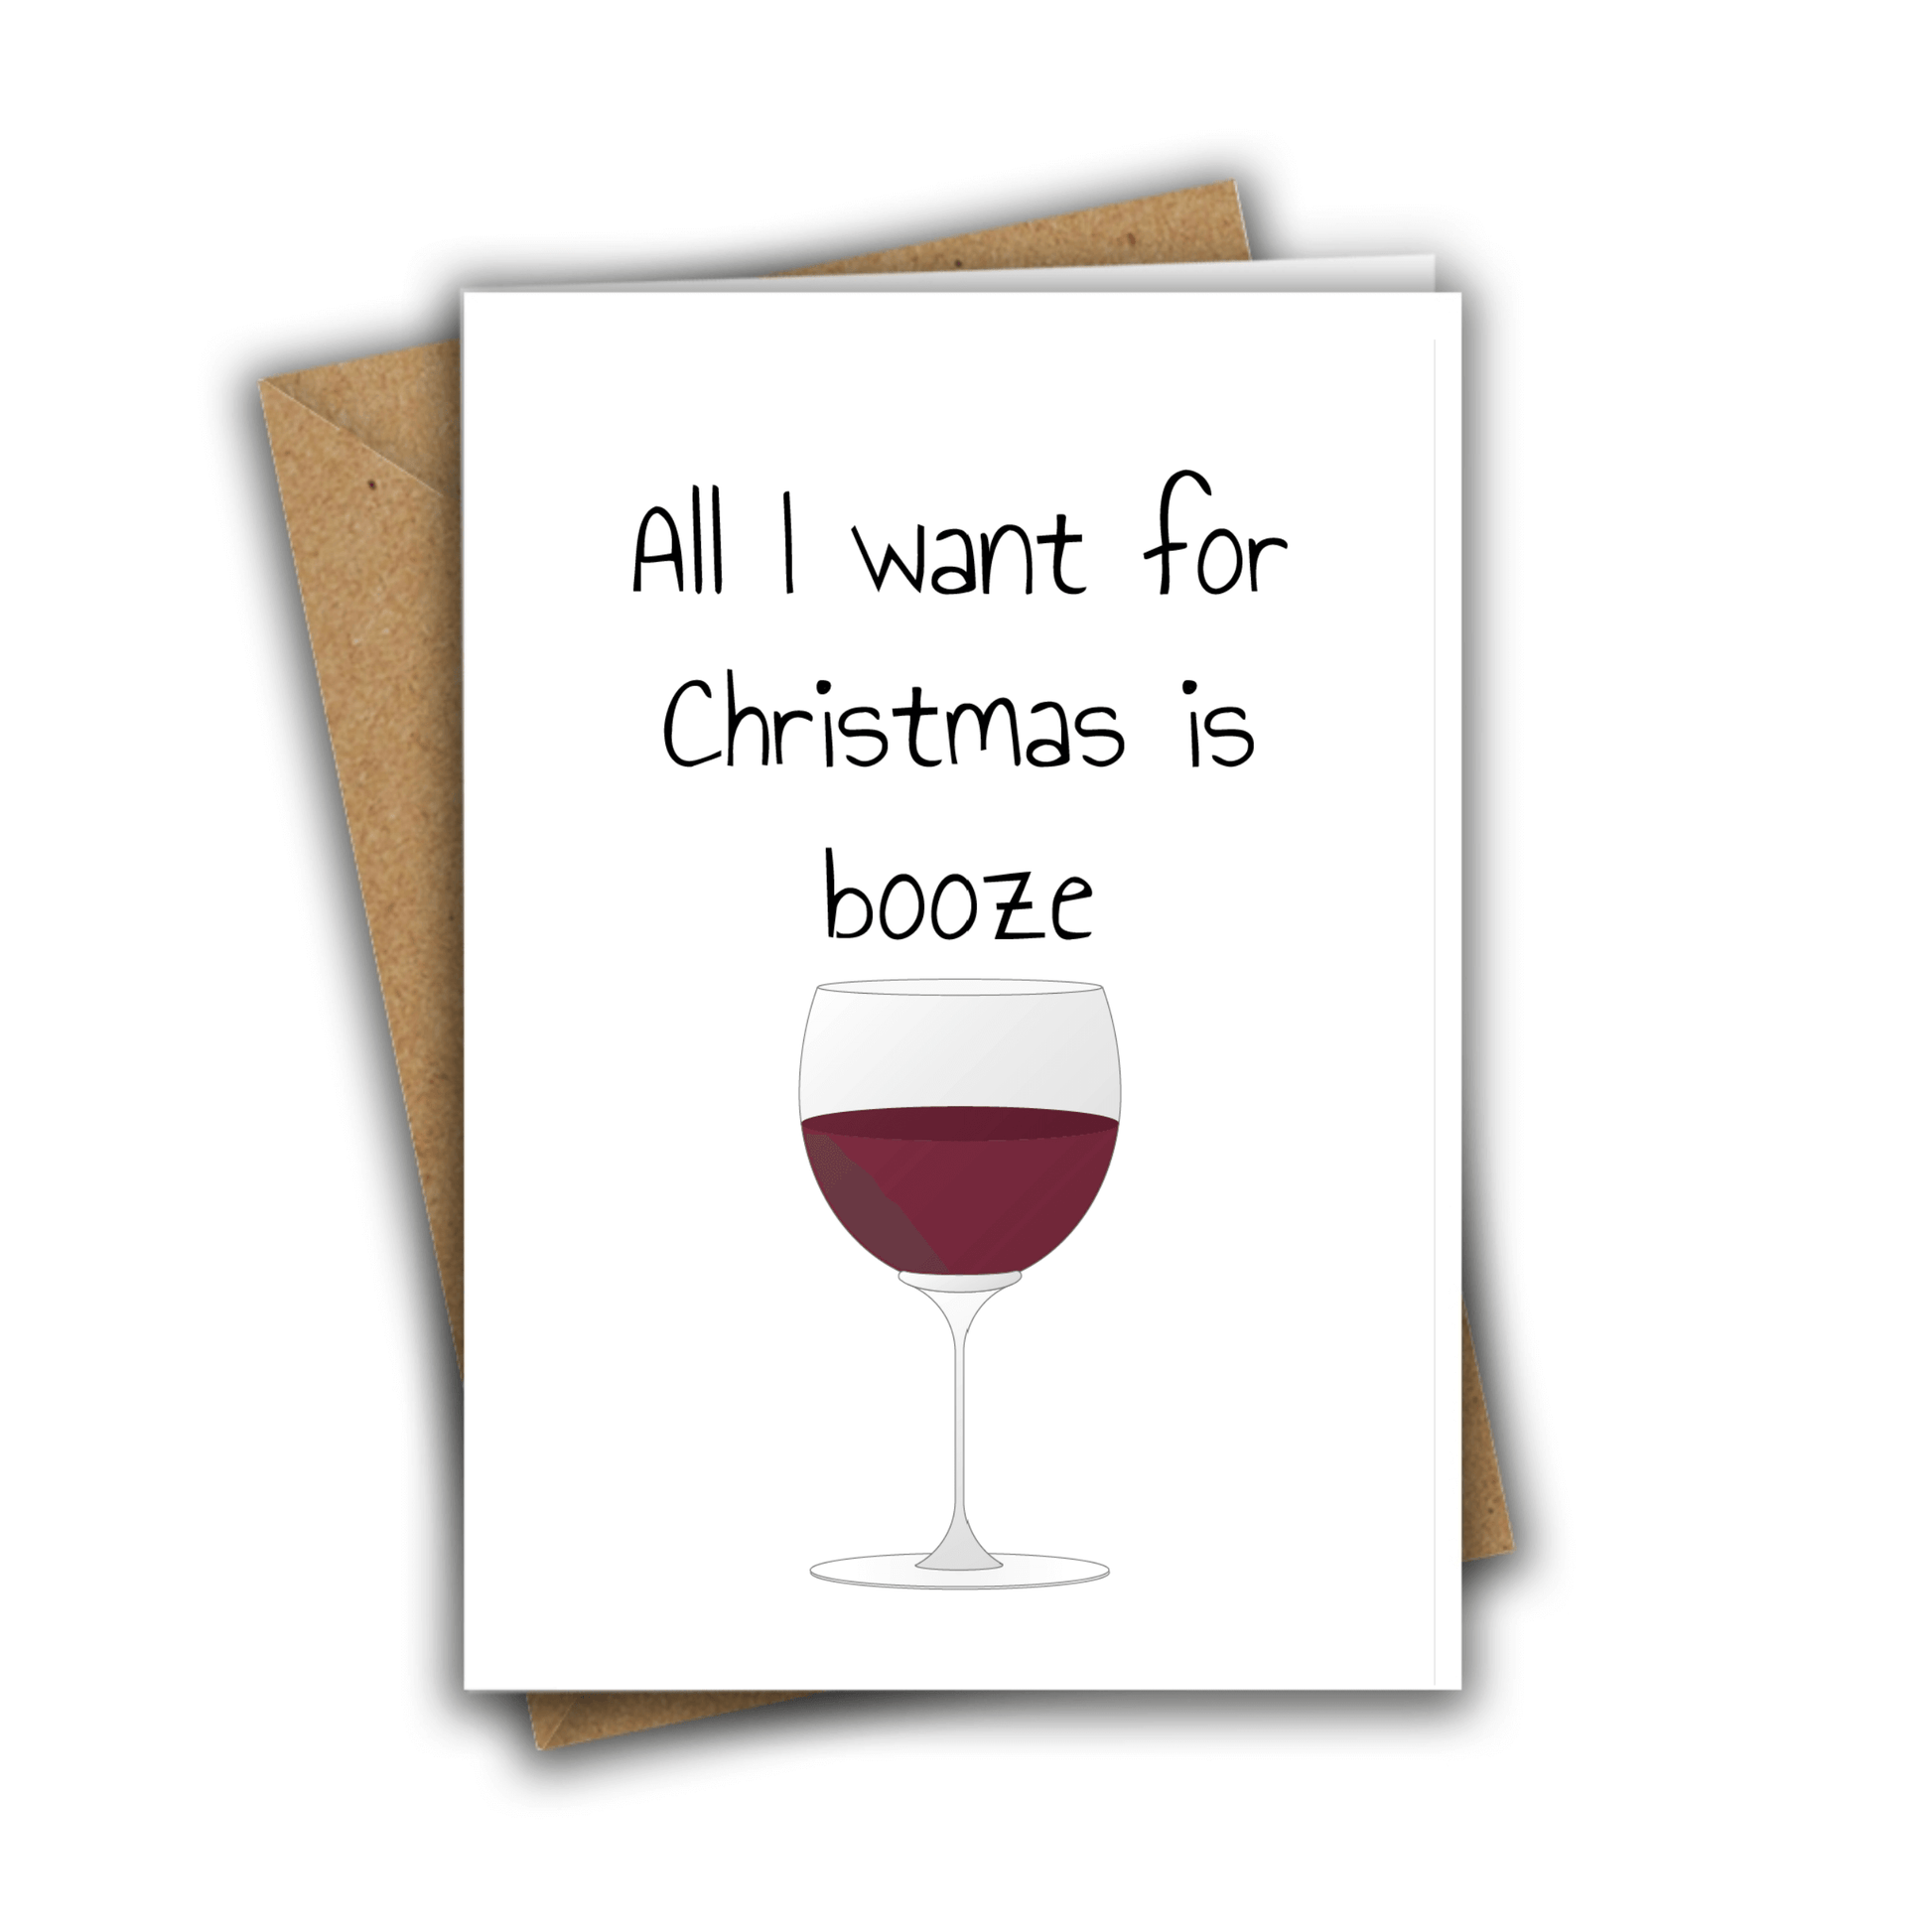 Little Kraken's All I Want for Christmas is Booze Funny Christmas Wine Greeting Card, for £3.50 each